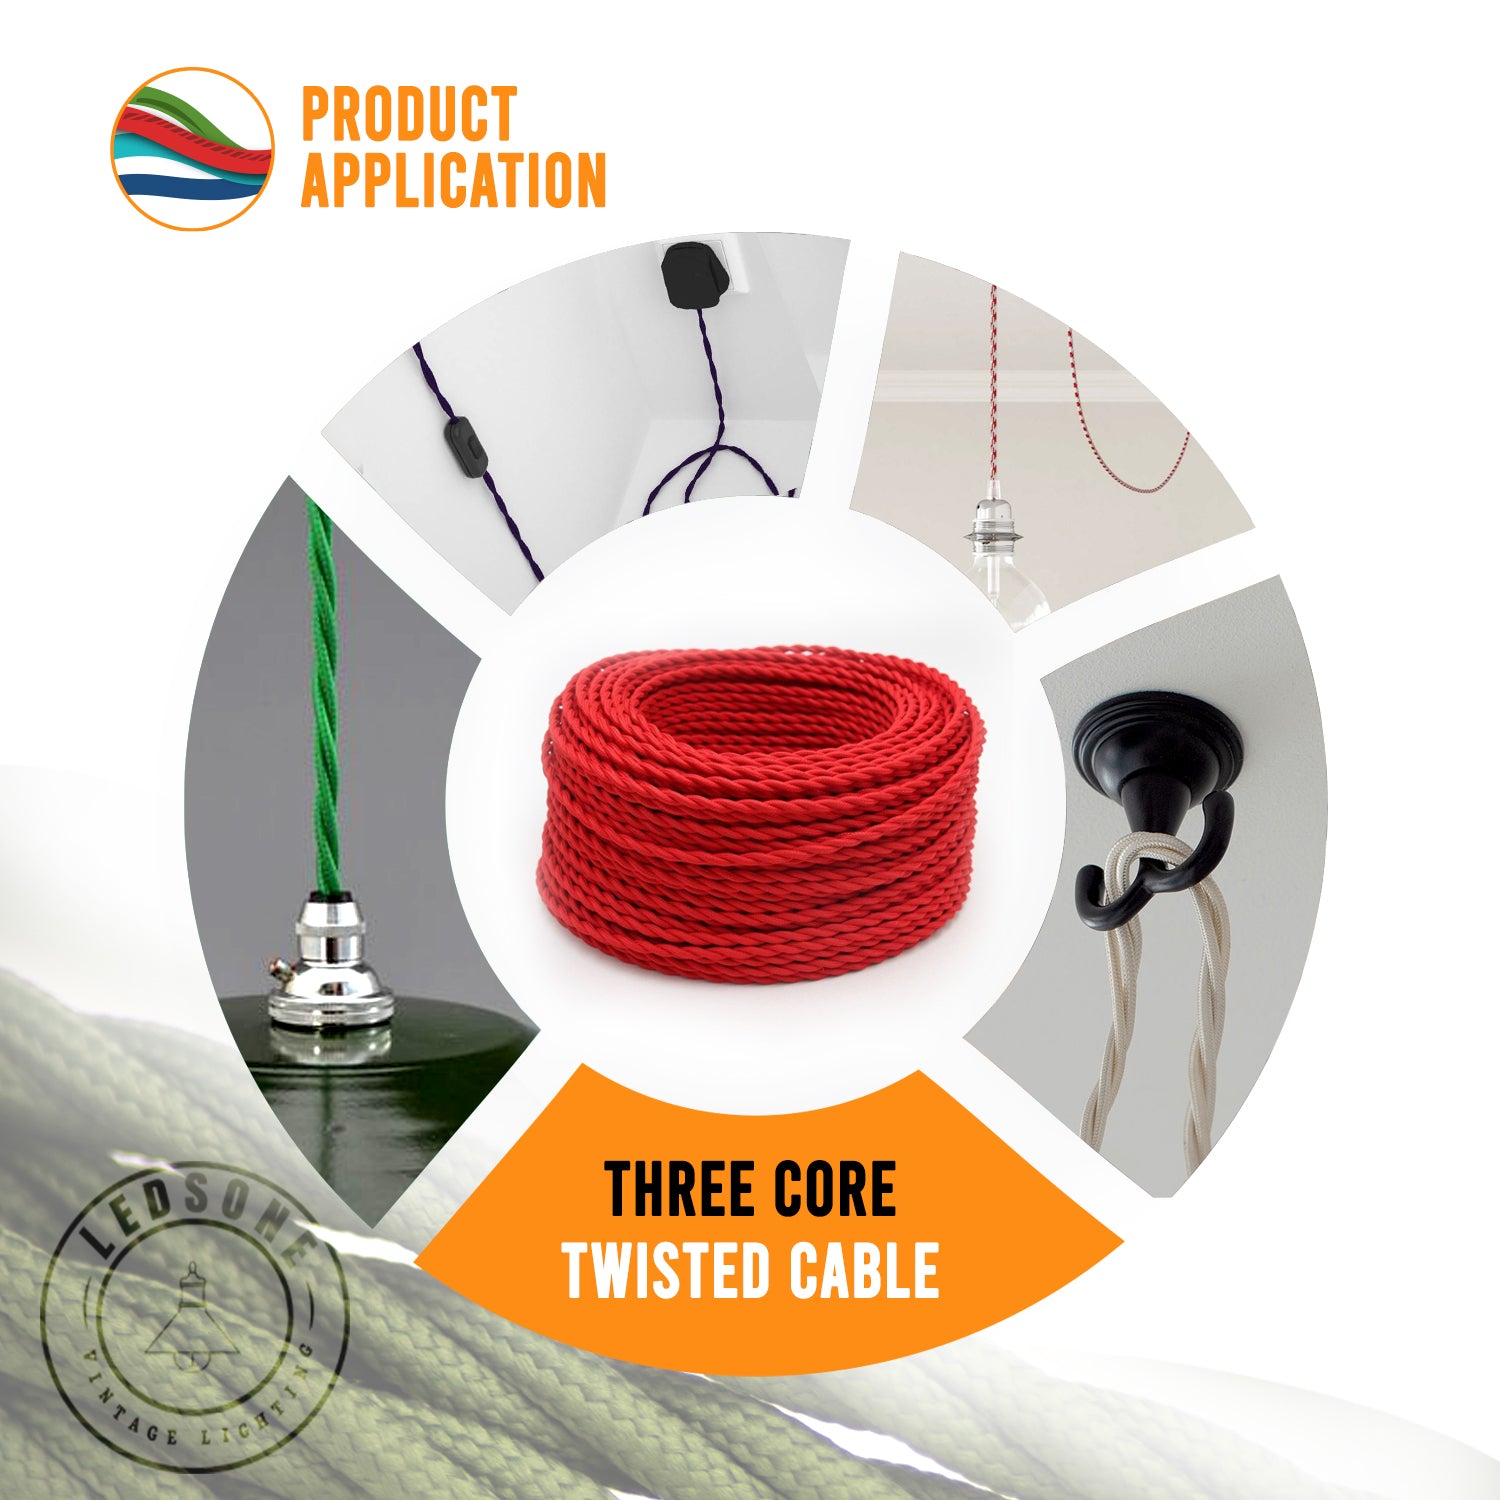 3 Core Twisted Vintage Fabric Braided Electric Cable| Ledsone.co.uk